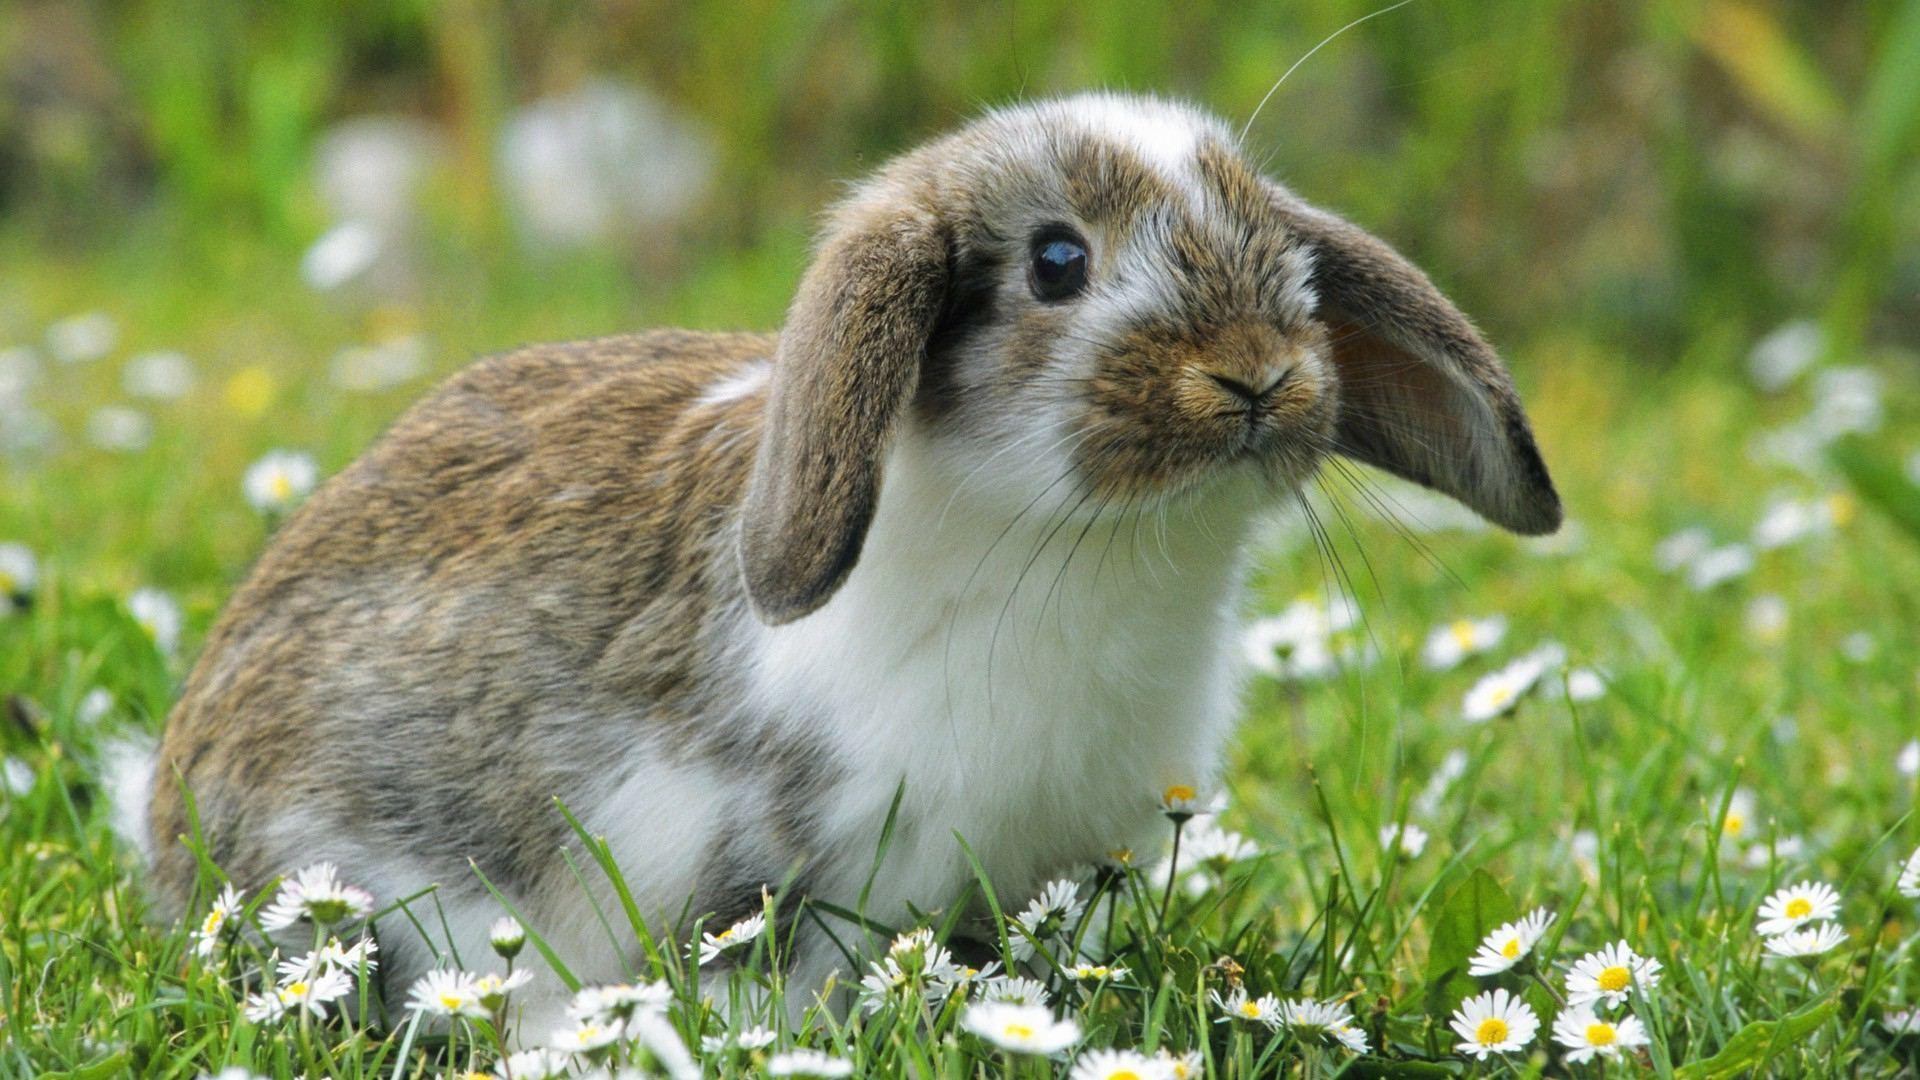 Download Bunny Wallpaper 9968 1920x1080 px High Resolution